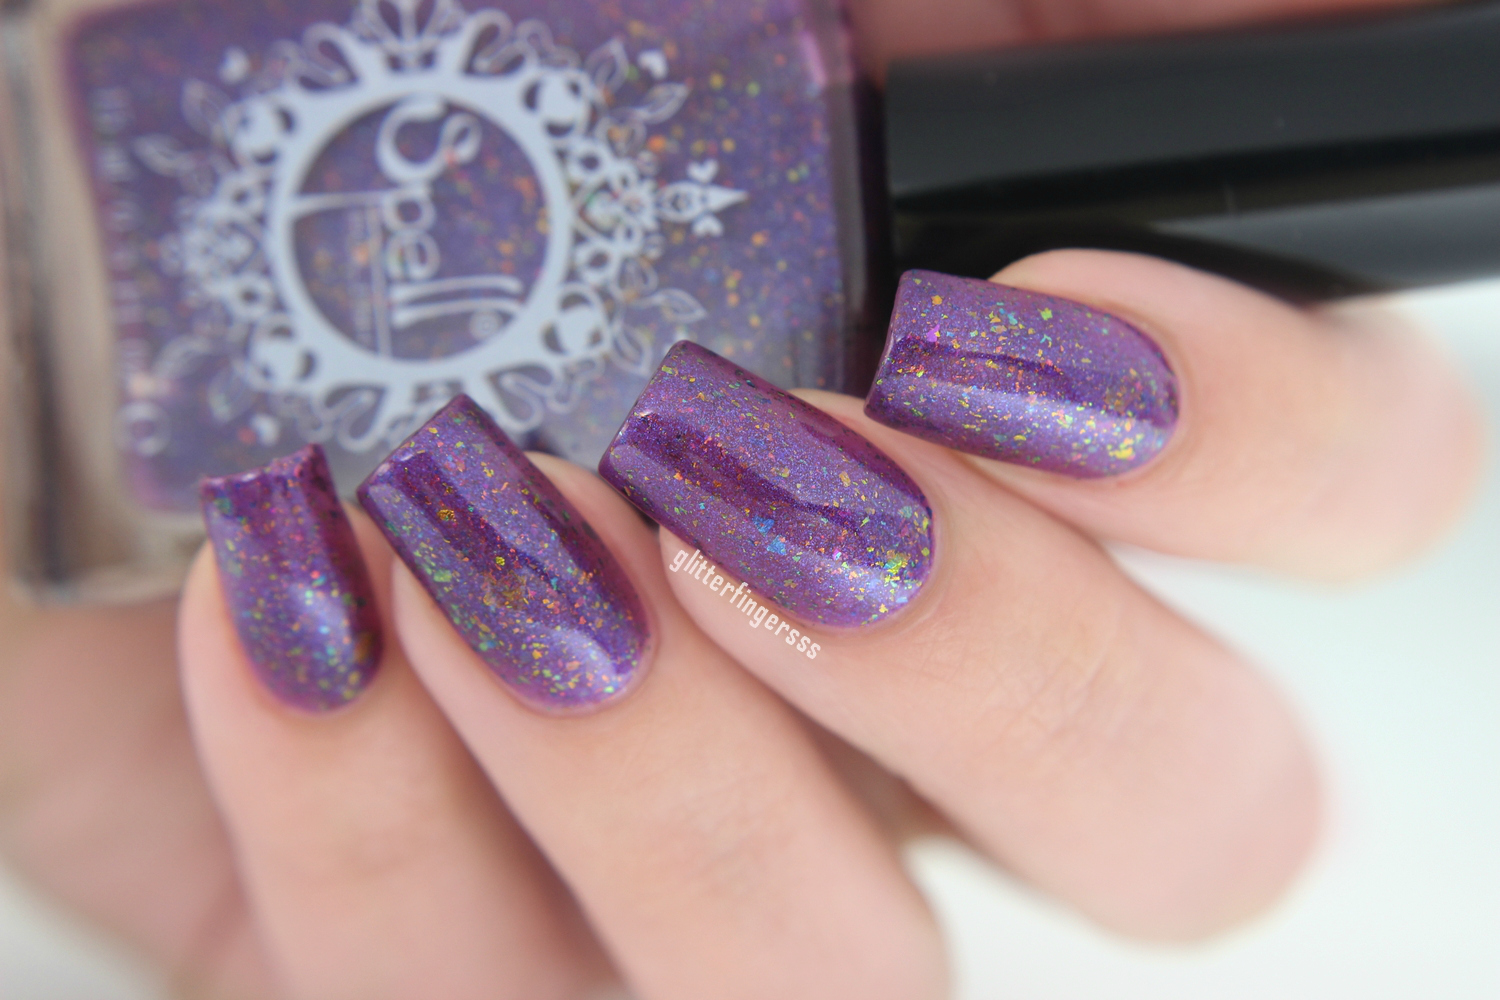 Spell Polish swatch/review ~ Glitterfingersss in english1500 x 1000